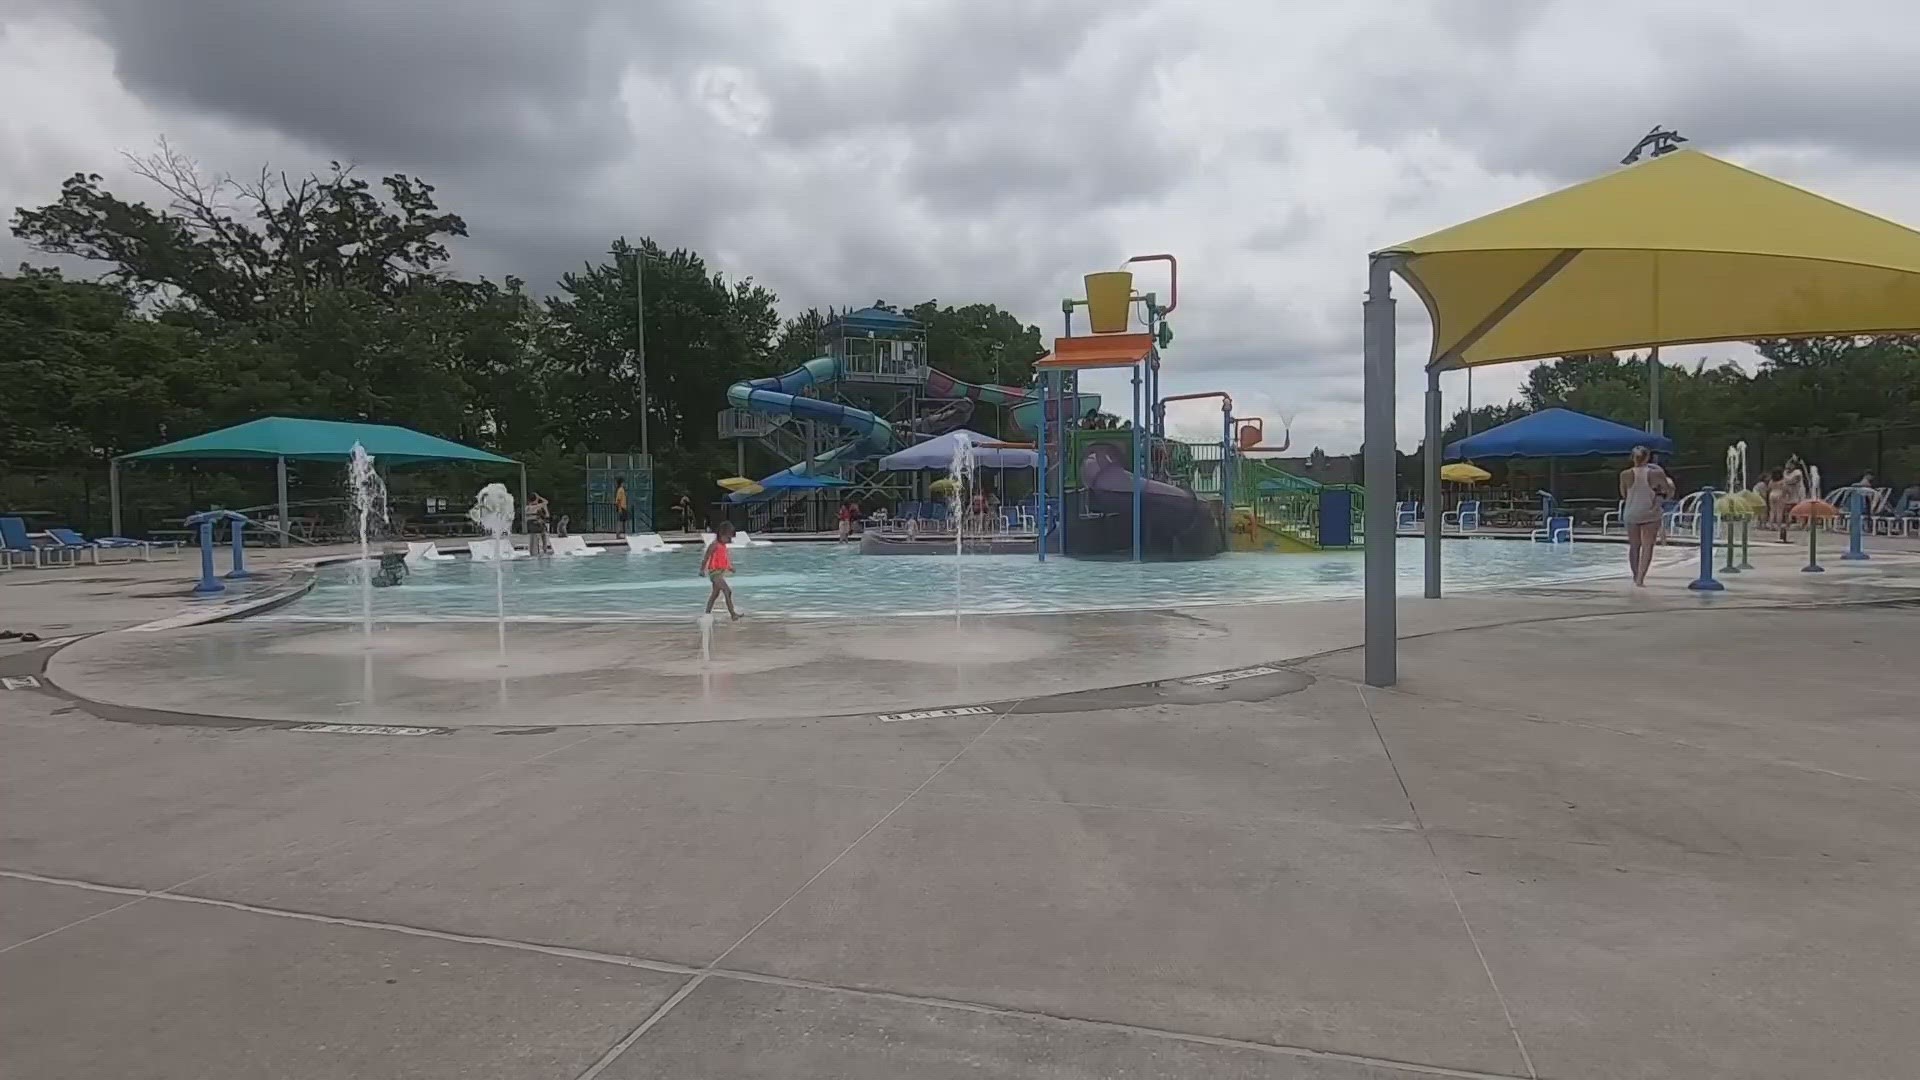 The St. Charles Parks and Recreation Department announced Wednesday that the McNair Aquatic Facility will permanently close.